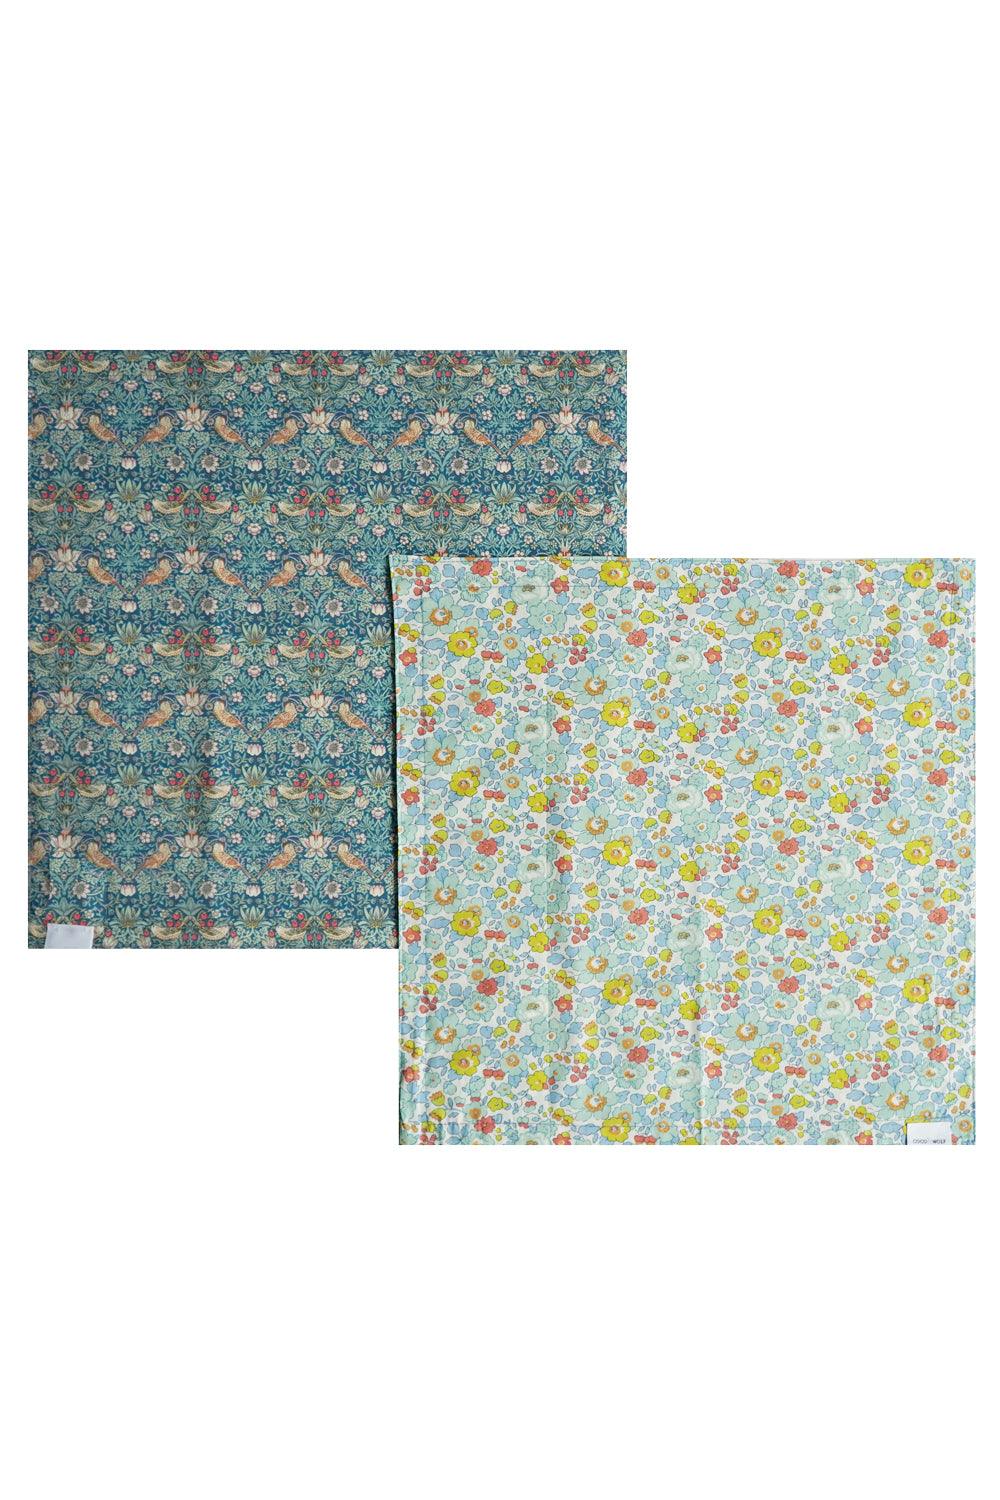 Reversible Stitch Napkin Set made with Liberty Fabric BETSY SAGE & STRAWBERRY THIEF - Coco & Wolf